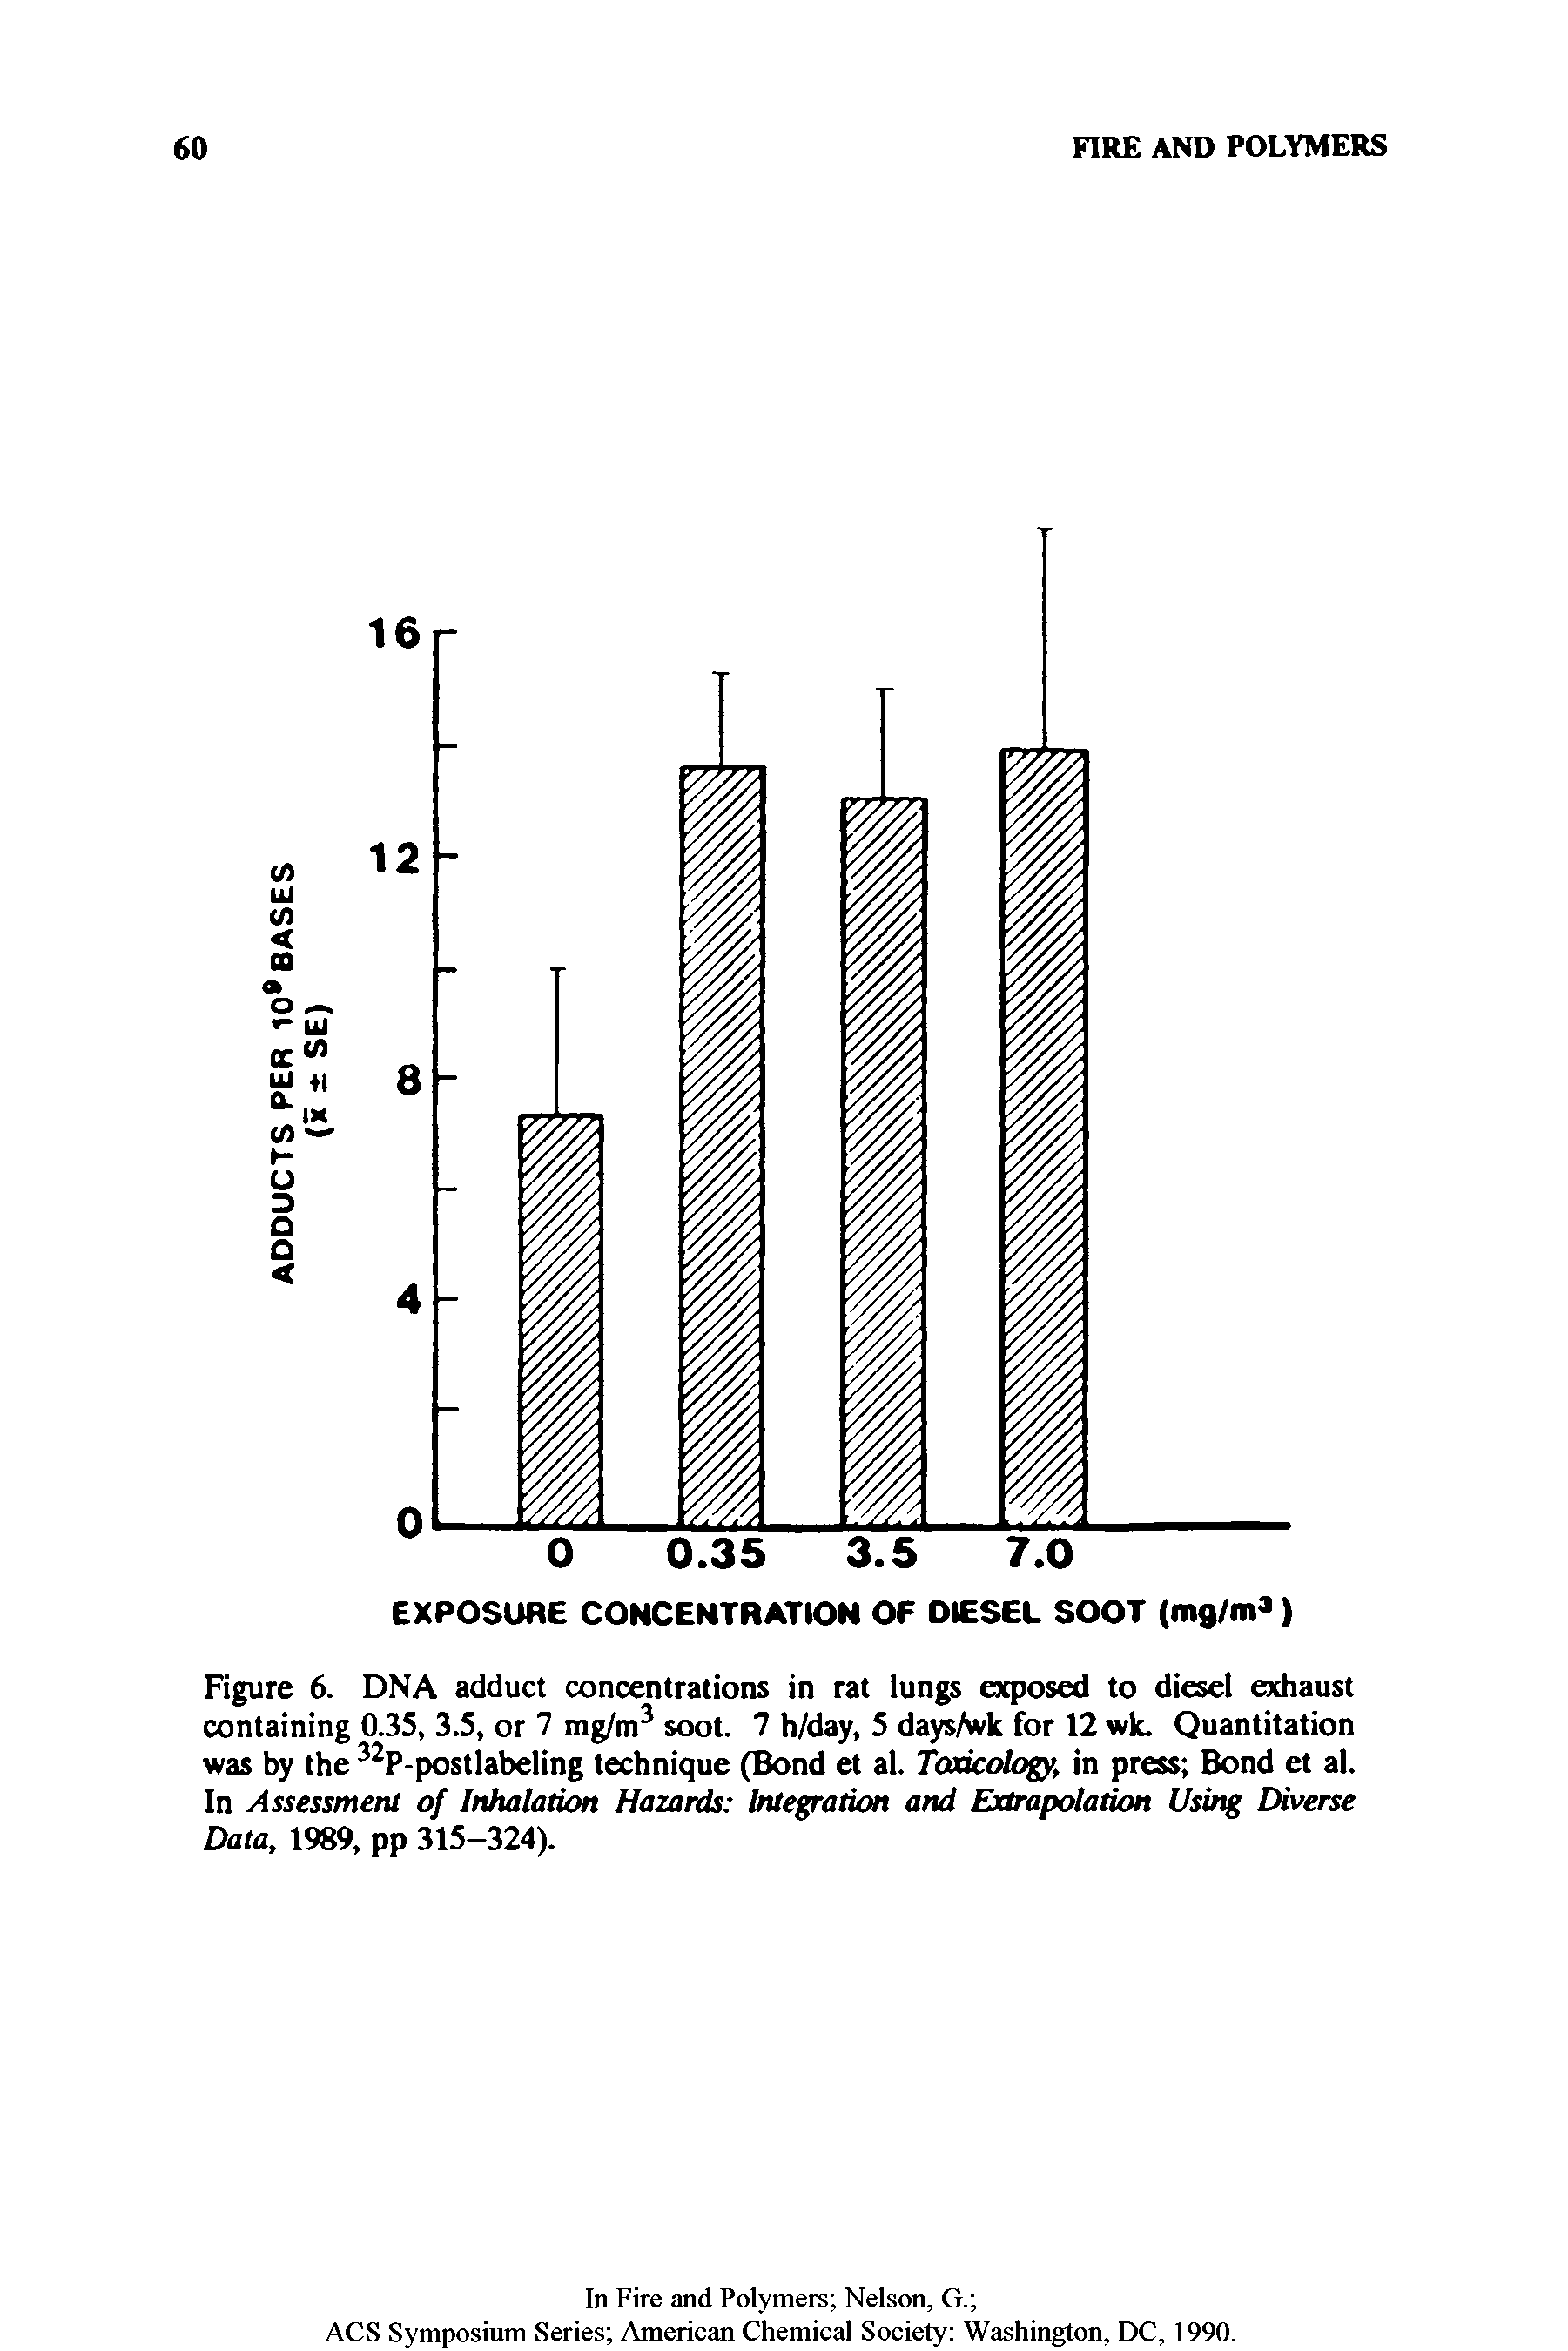 Figure 6. DNA adduct concentrations in rat lungs exposed to diesel exhaust containing 0.35, 3.5, or 7 mg/m3 soot. 7 h/day, 5 days/wk for 12 wk. Quantitation was by the 32P-postlabeling technique (Bond et al. Toxicology, in press Bond et al. In Assessment of Inhalation Hazards Integration and Extrapolation Using Diverse Data, 1989, pp 315-324).